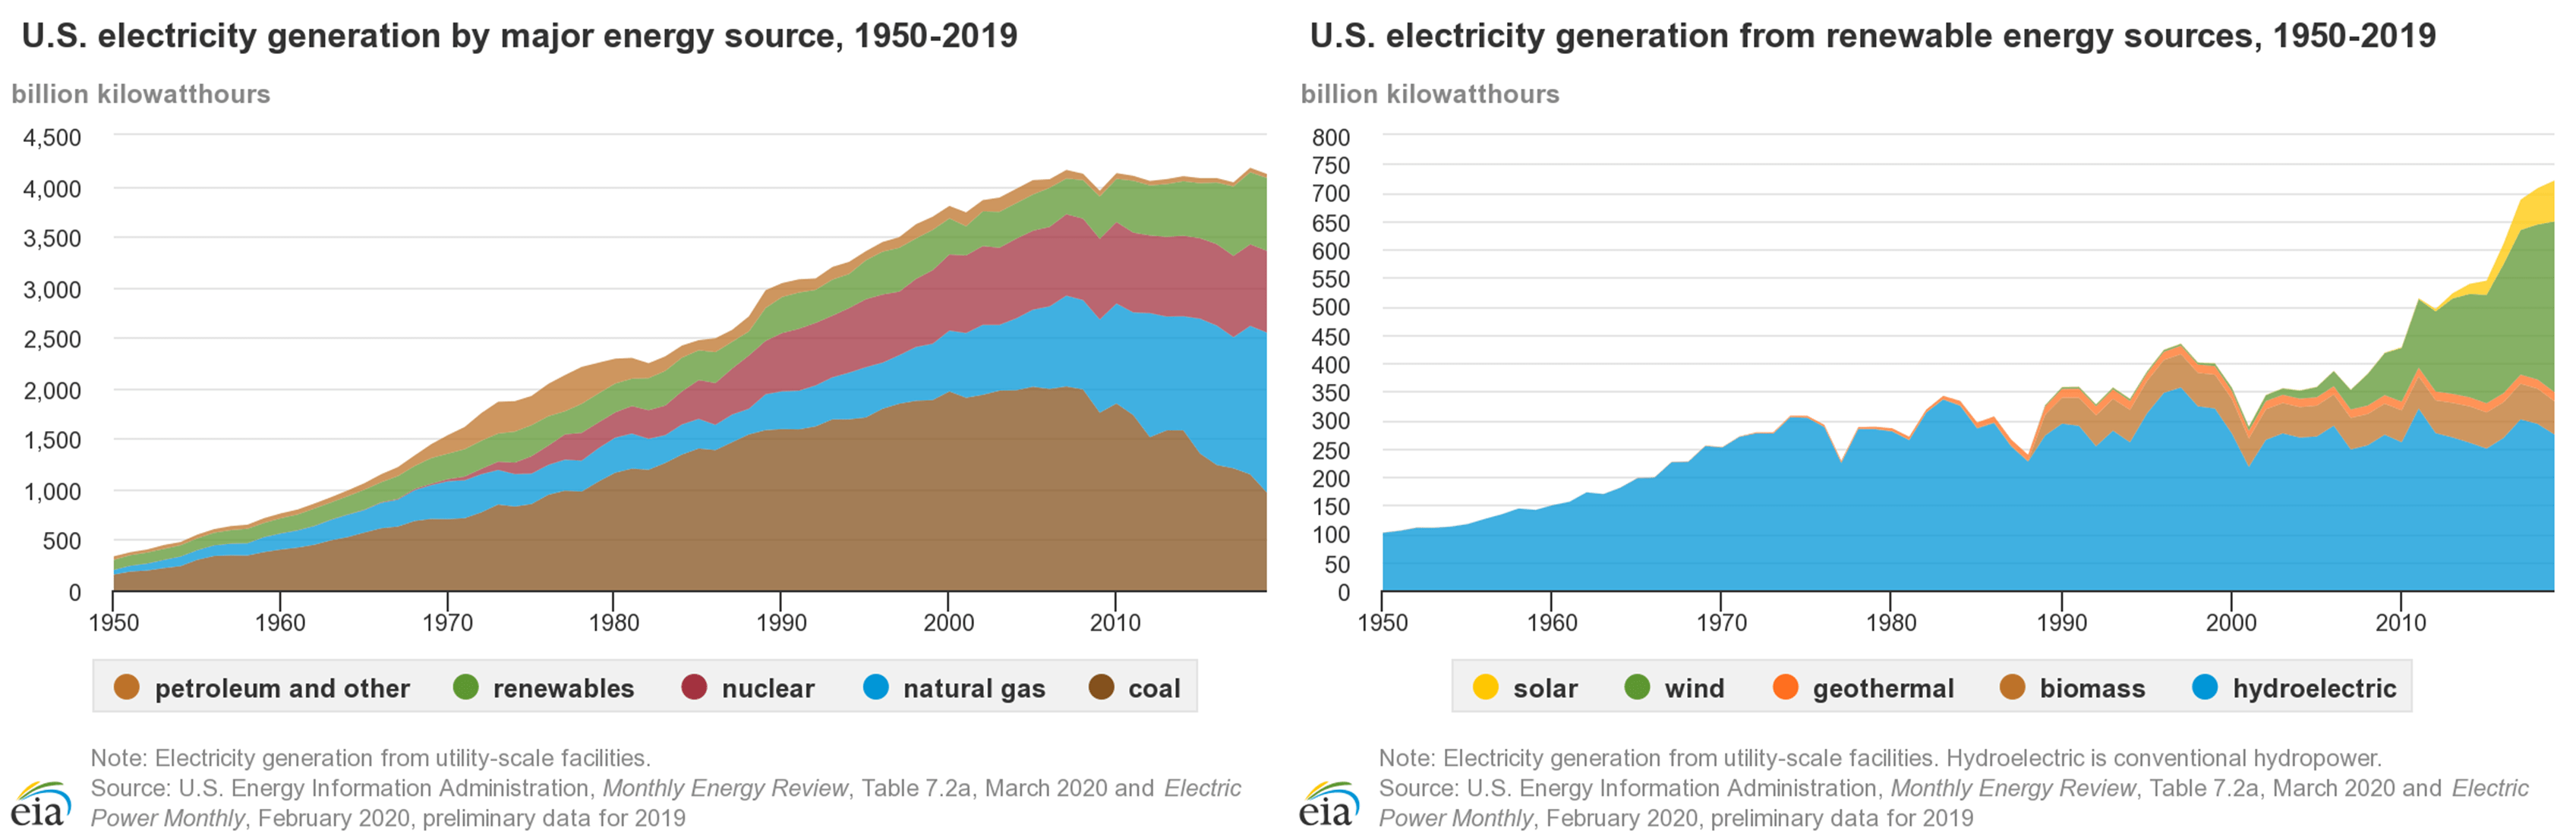 U.S. Electricity Generation by Source 1950-2019